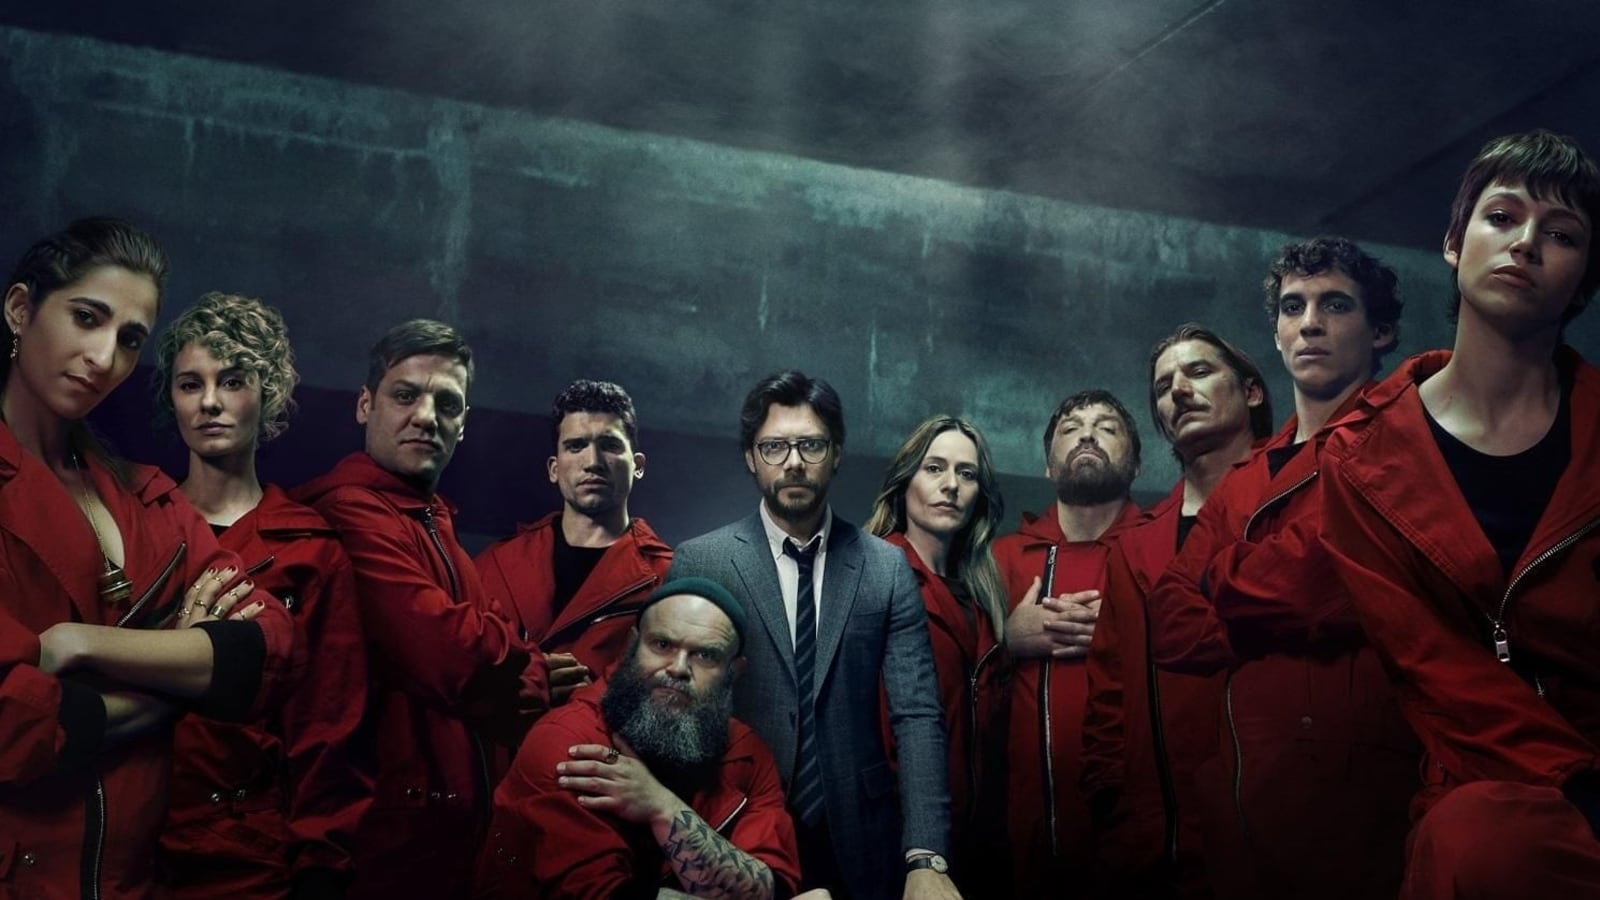  Indian fans spotted ganapathy image in Money heist heroine home